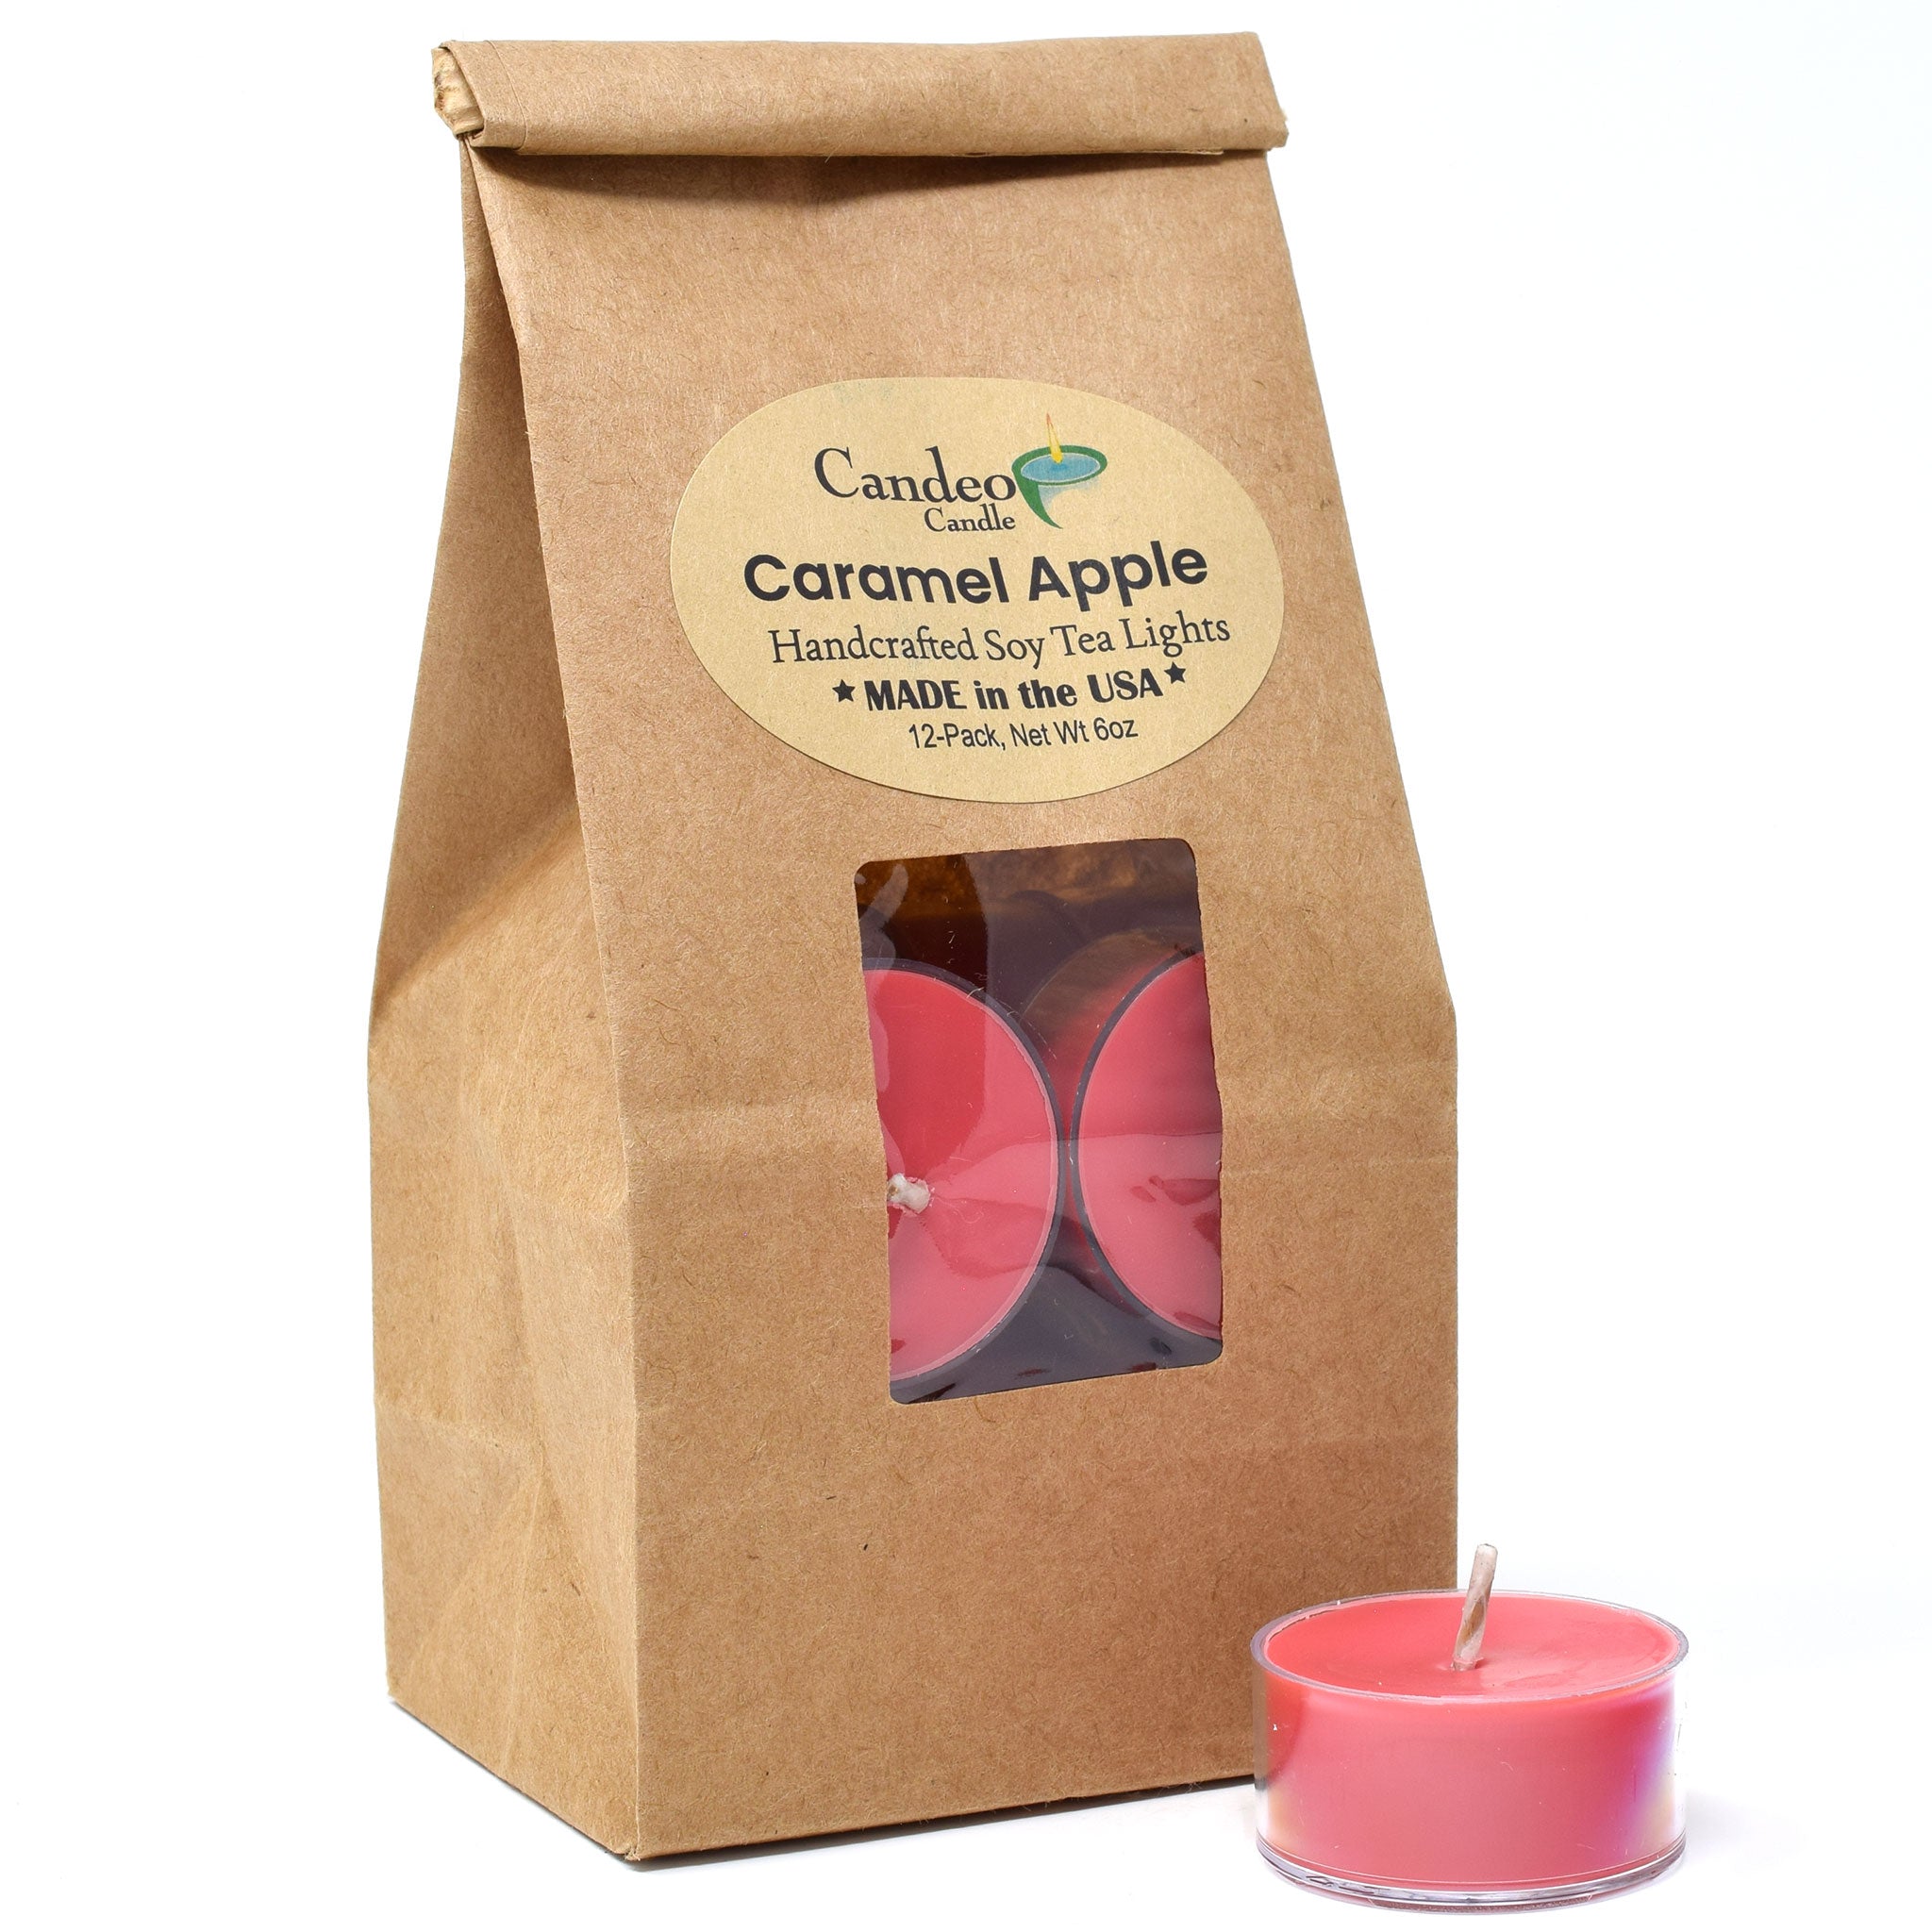 Caramel Apple, Soy Tea Light 12-Pack - Candeo Candle